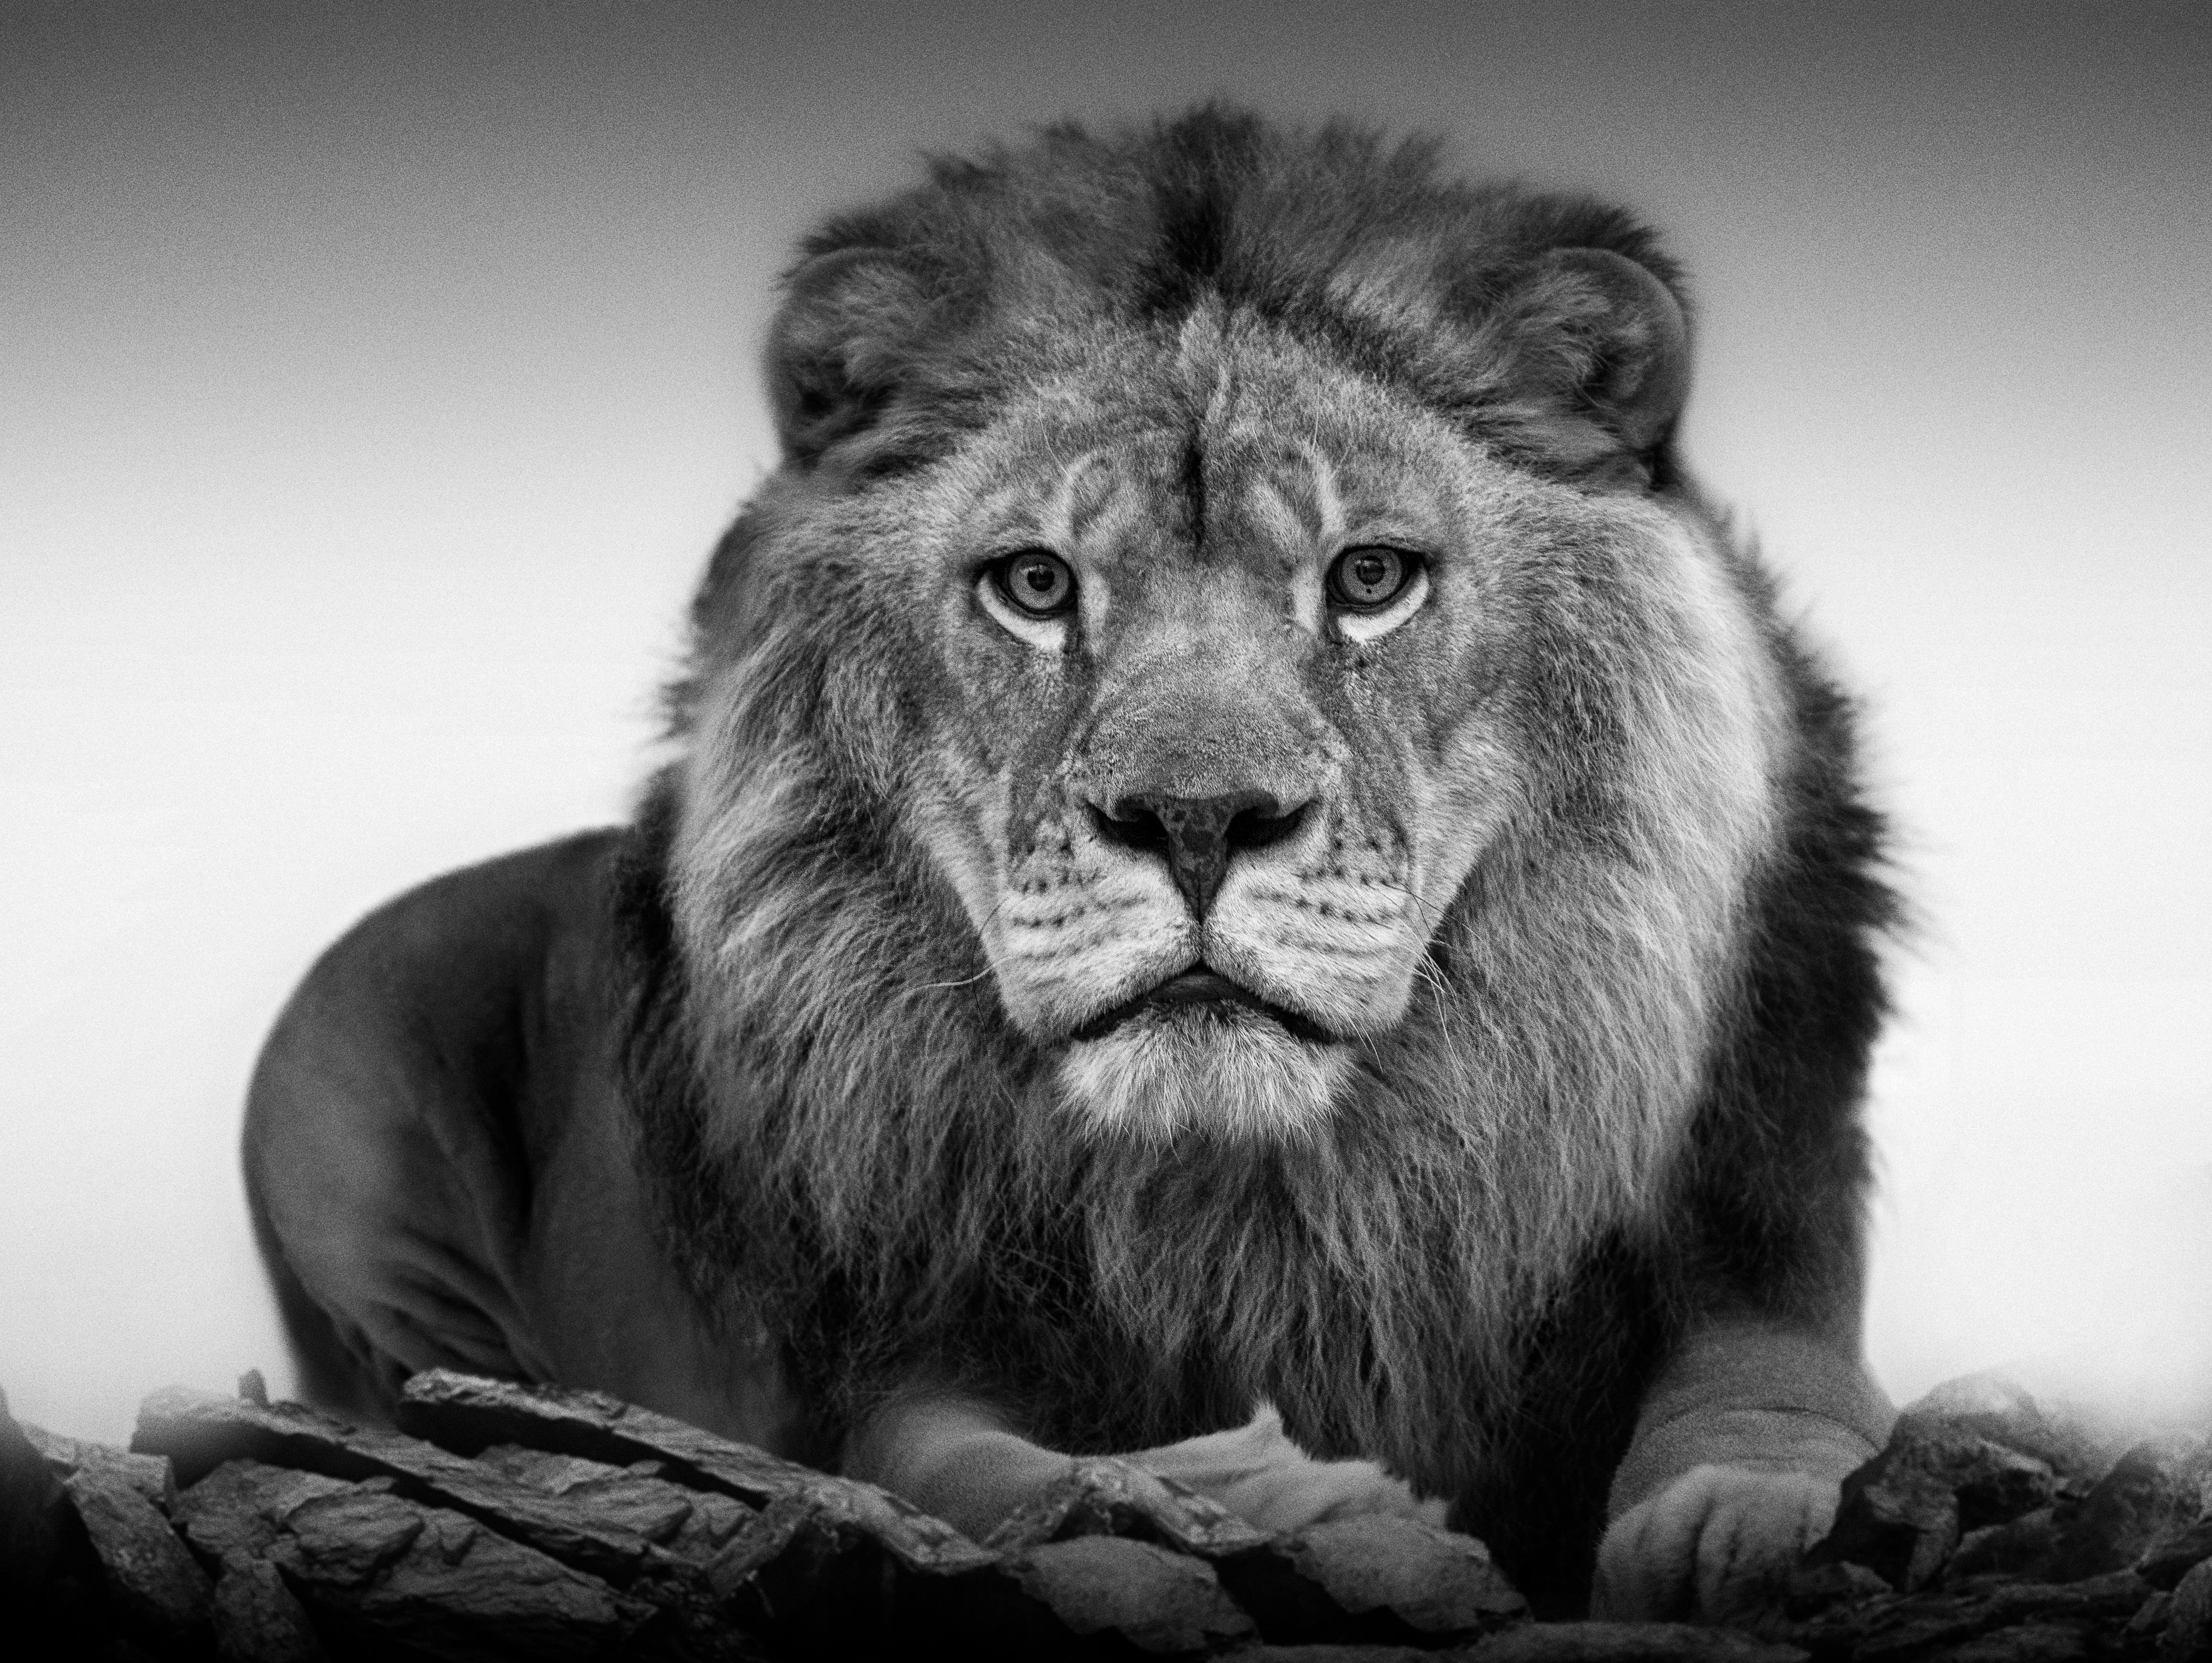 Shane Russeck Black and White Photograph - "Lion Portrait"- 20x30  African Lion  Black & White Photography